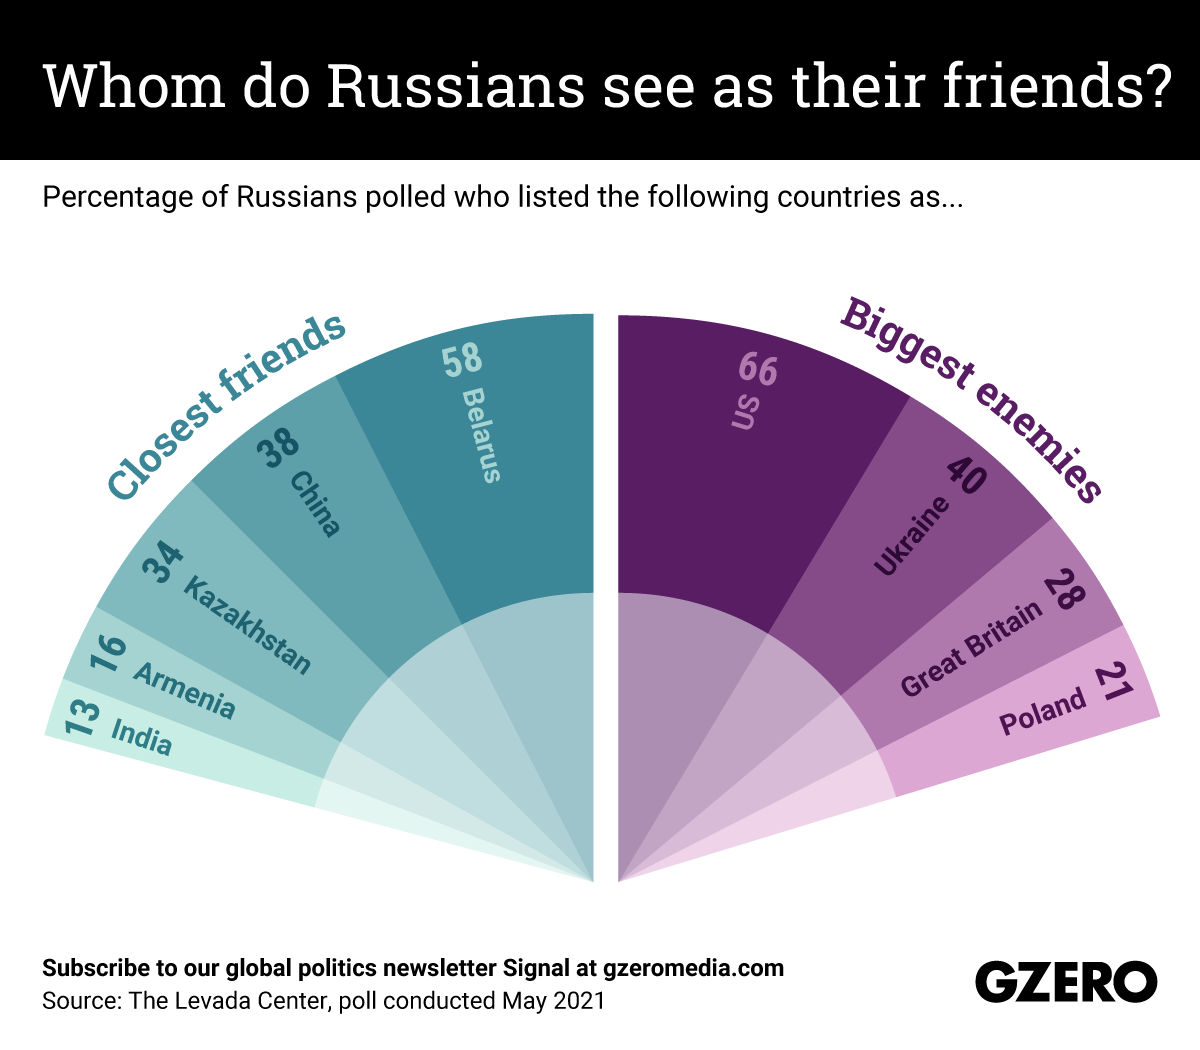 The Graphic Truth: Whom do Russians see as their friends?